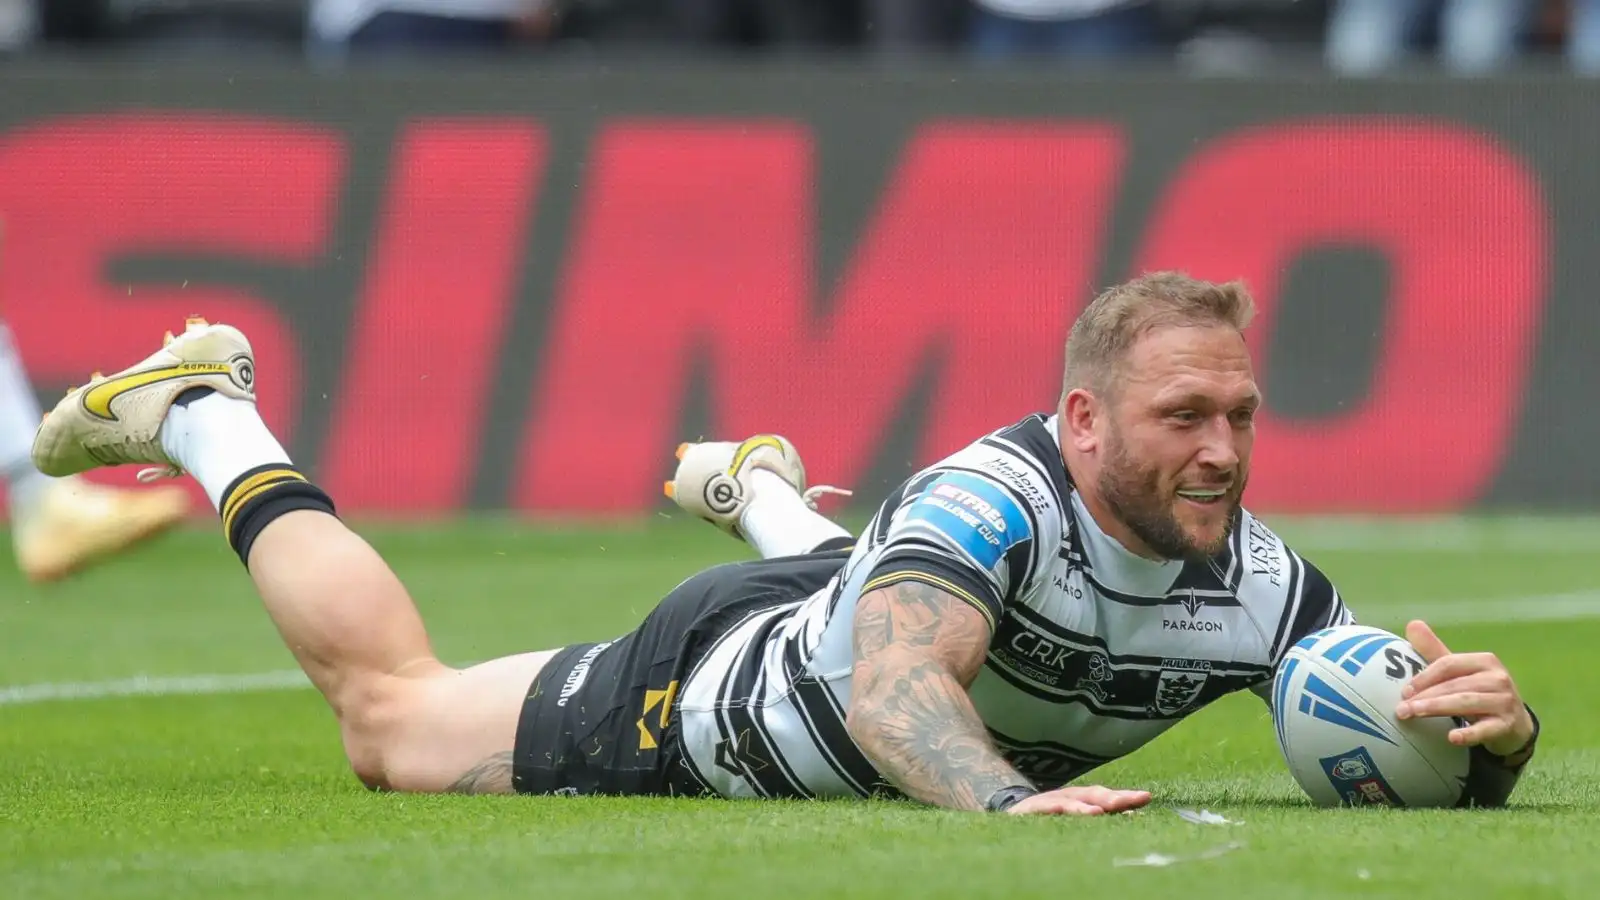 Josh Griffin is expected to join Wakefield following his release from Hull. Photo by James Heaton/News Images.